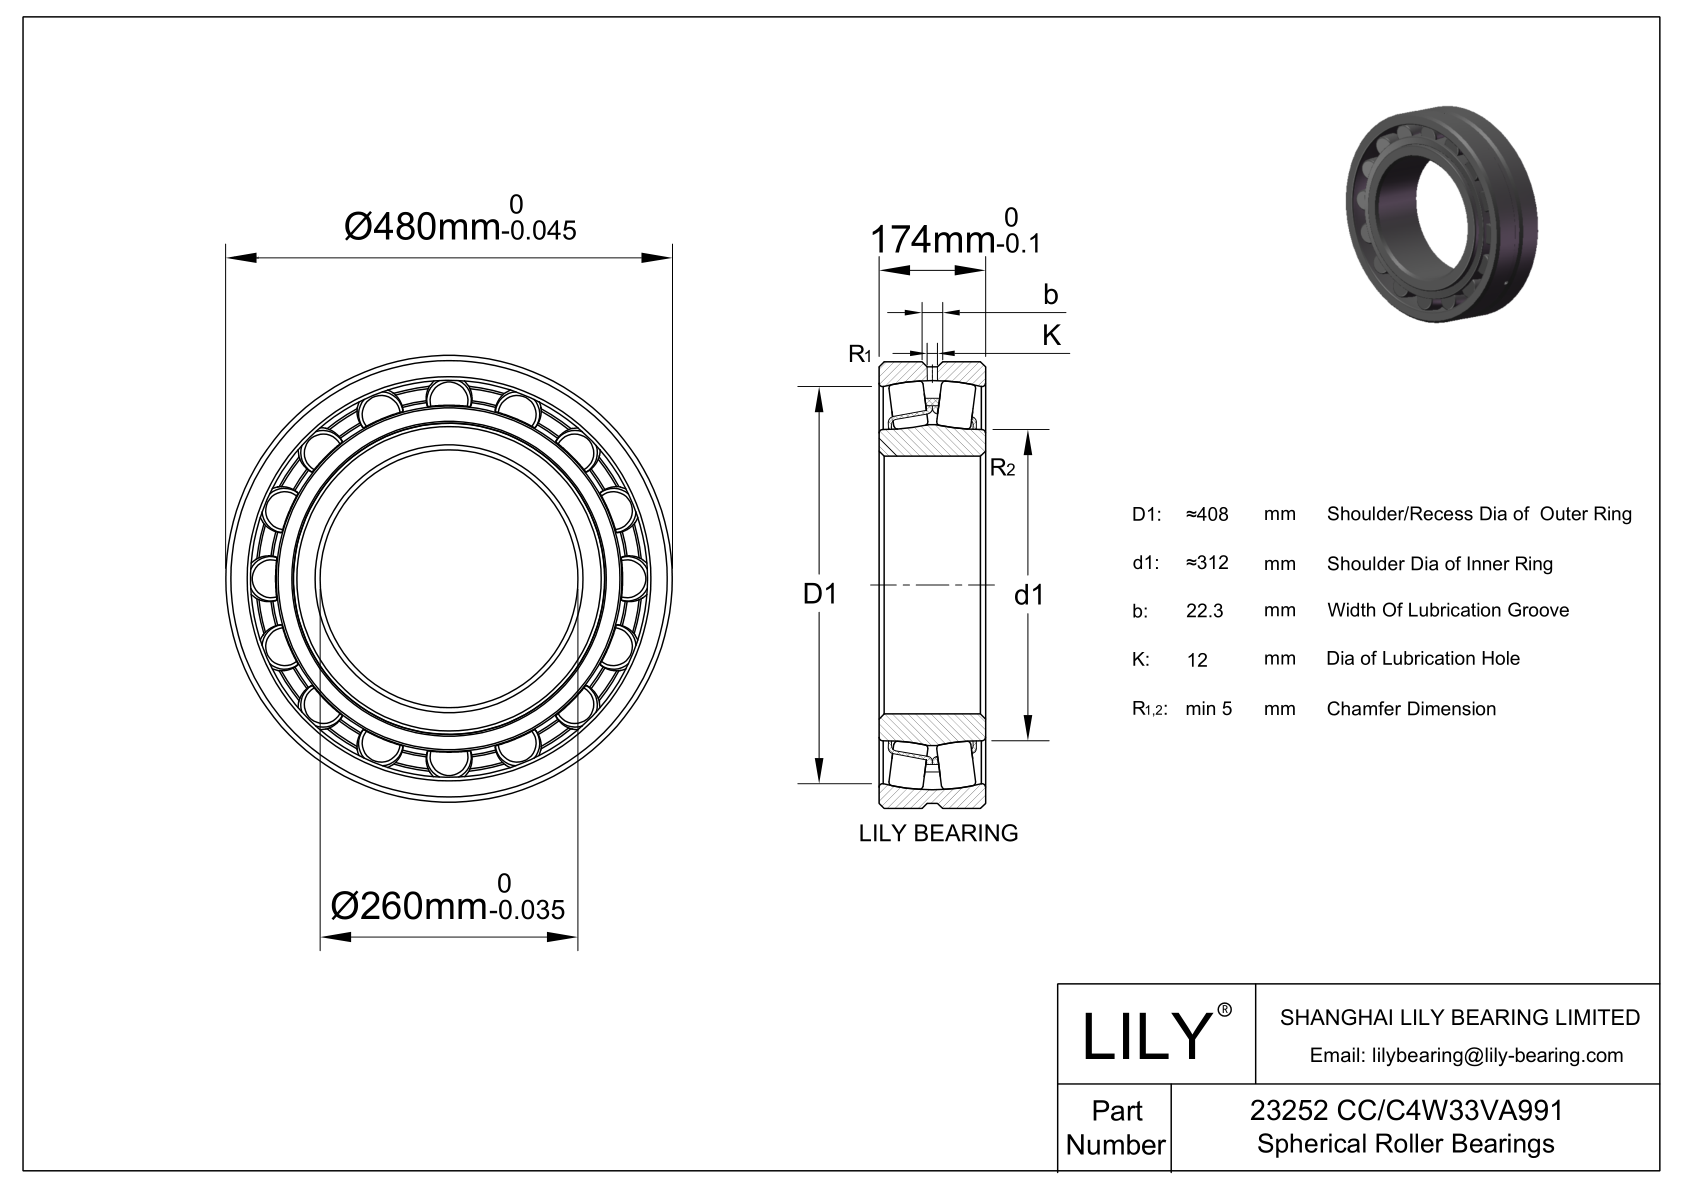 23252 CC/C4W33VA991 Double Row Spherical Roller Bearing cad drawing